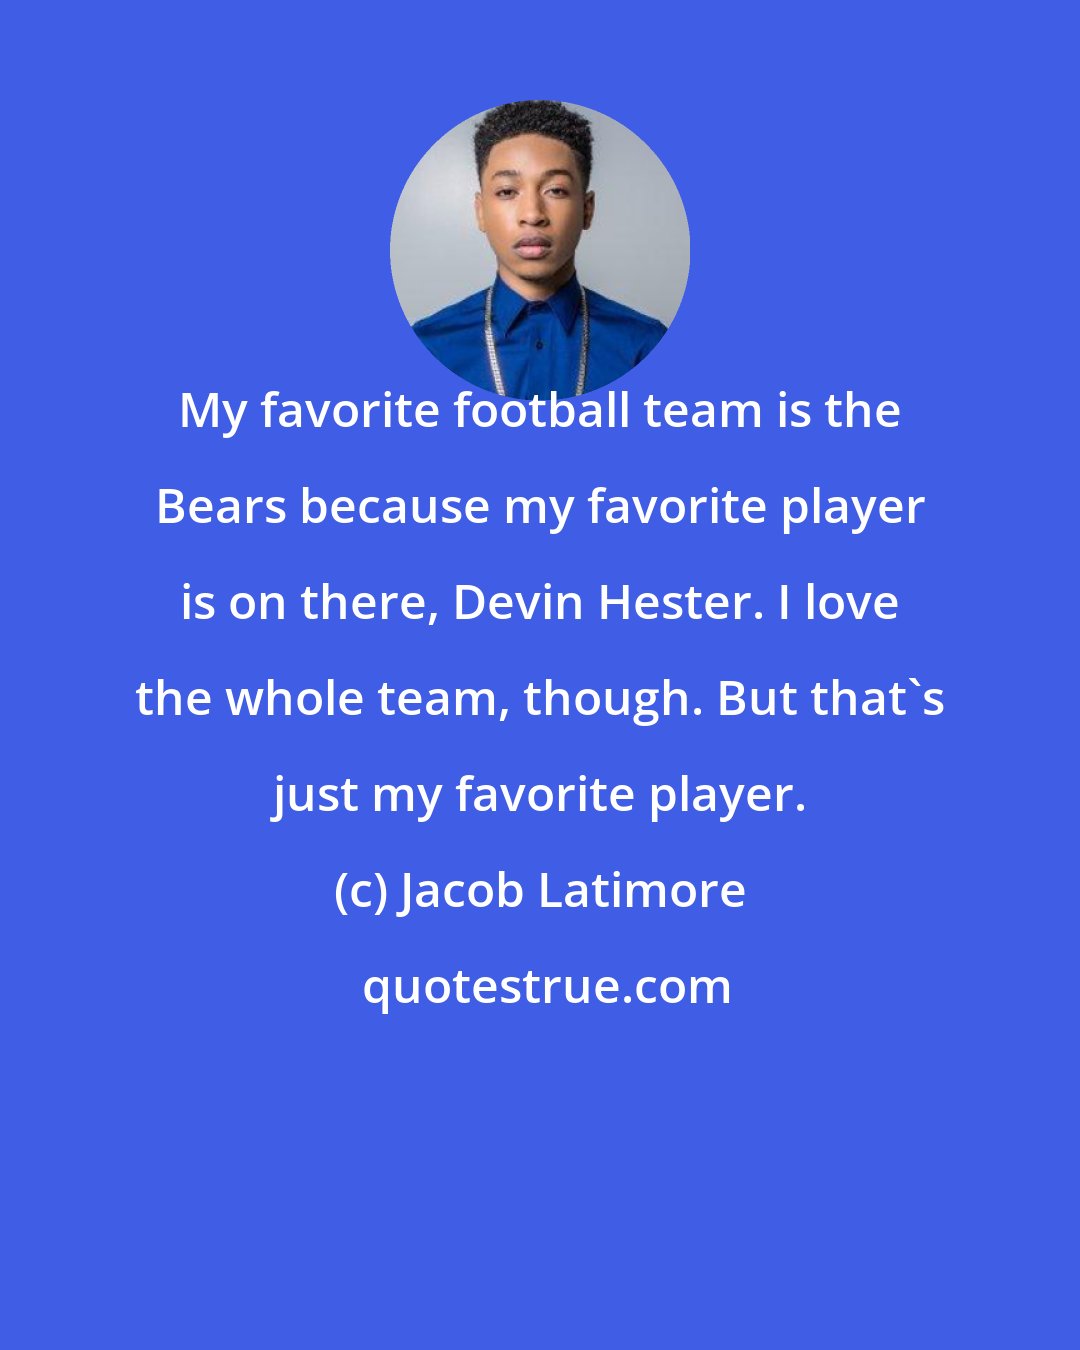 Jacob Latimore: My favorite football team is the Bears because my favorite player is on there, Devin Hester. I love the whole team, though. But that's just my favorite player.